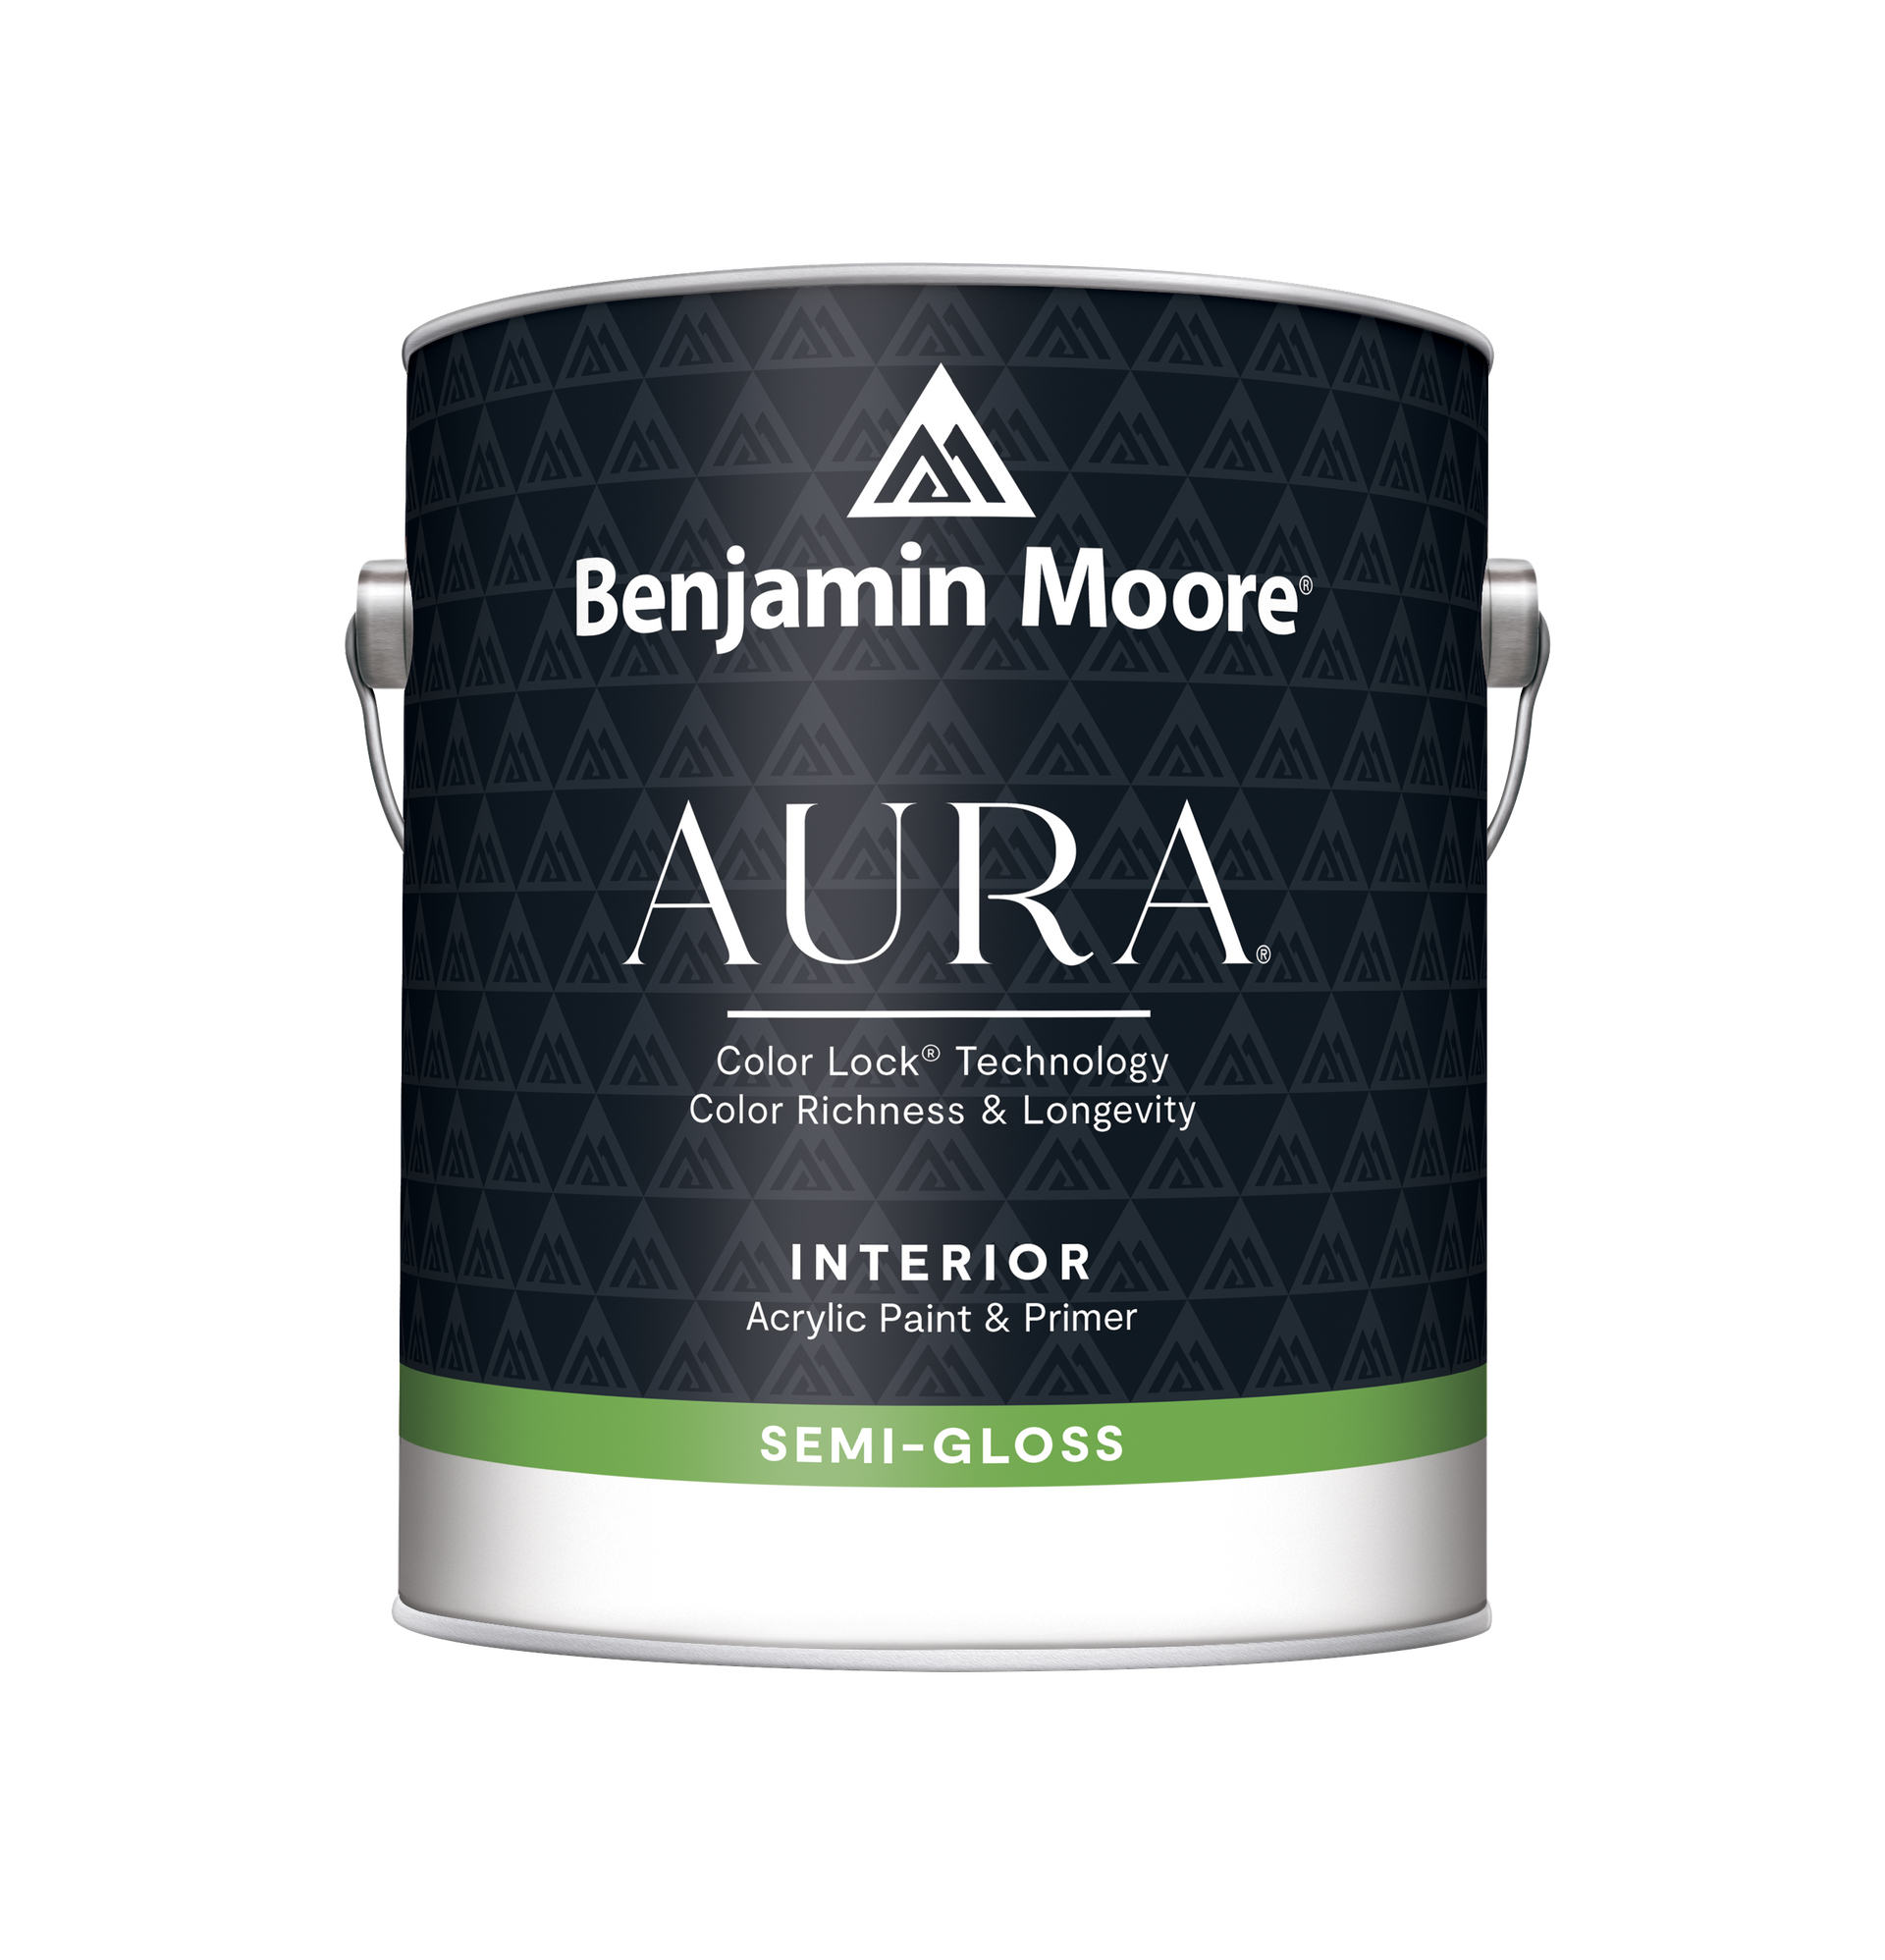 Image of can of AURA® Interior Paint